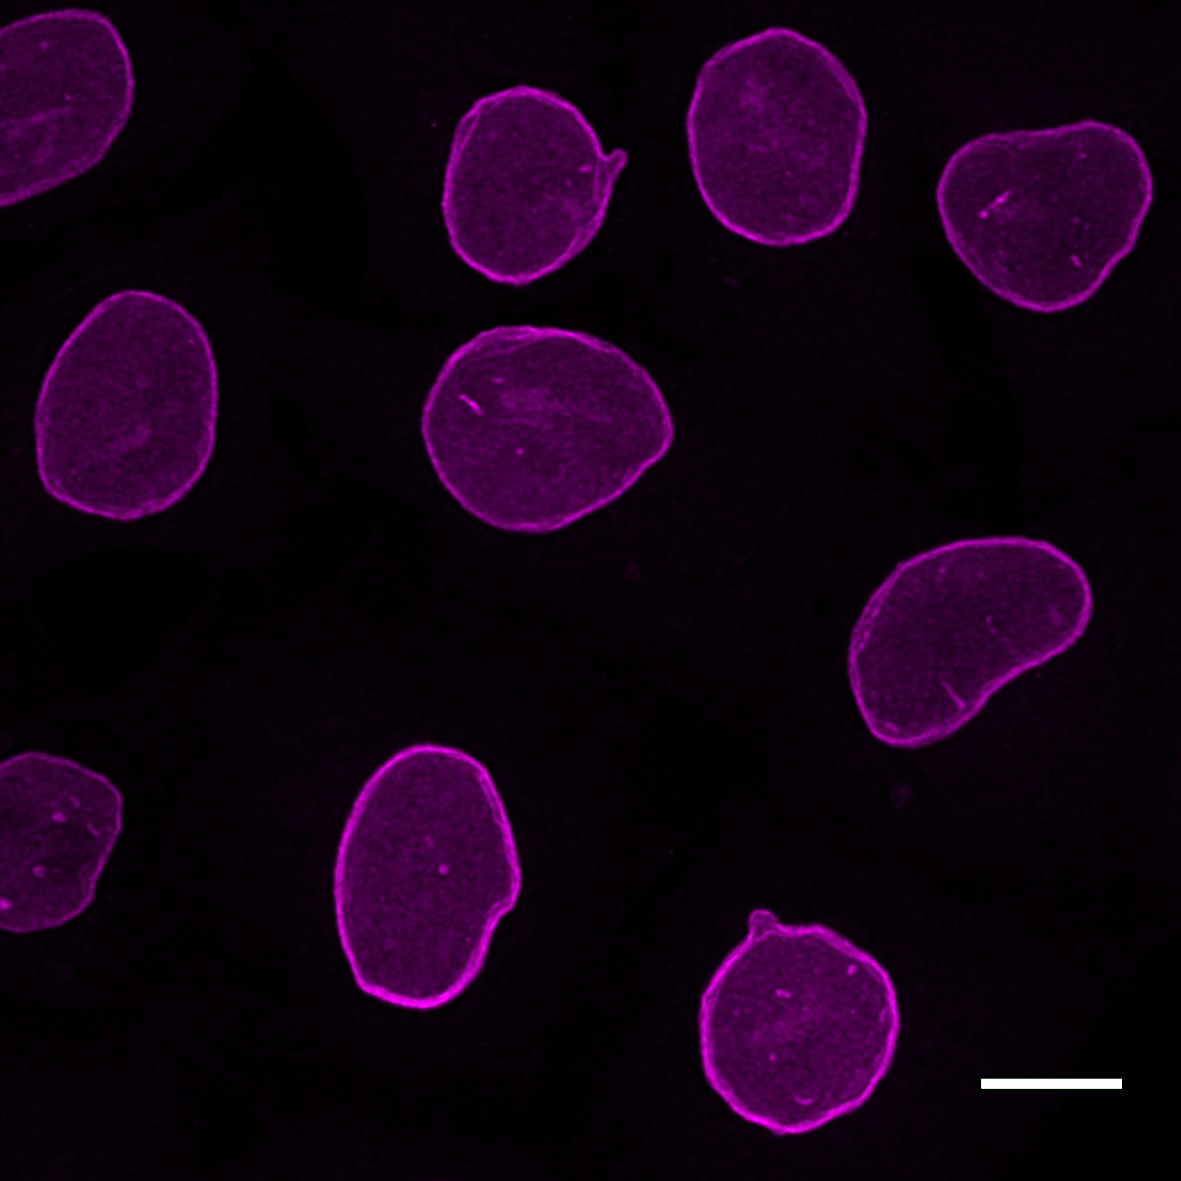 HeLa cells were immunostained with mouse IgG3 anti-Lamin A/C antibody + alpaca anti-mouse IgG3 VHH Alexa Fluor? 647 (magenta). Scale bar, 10 μm. Images were recorded at the Core Facility Bioimaging at the Biomedical Center, LMU Munich.